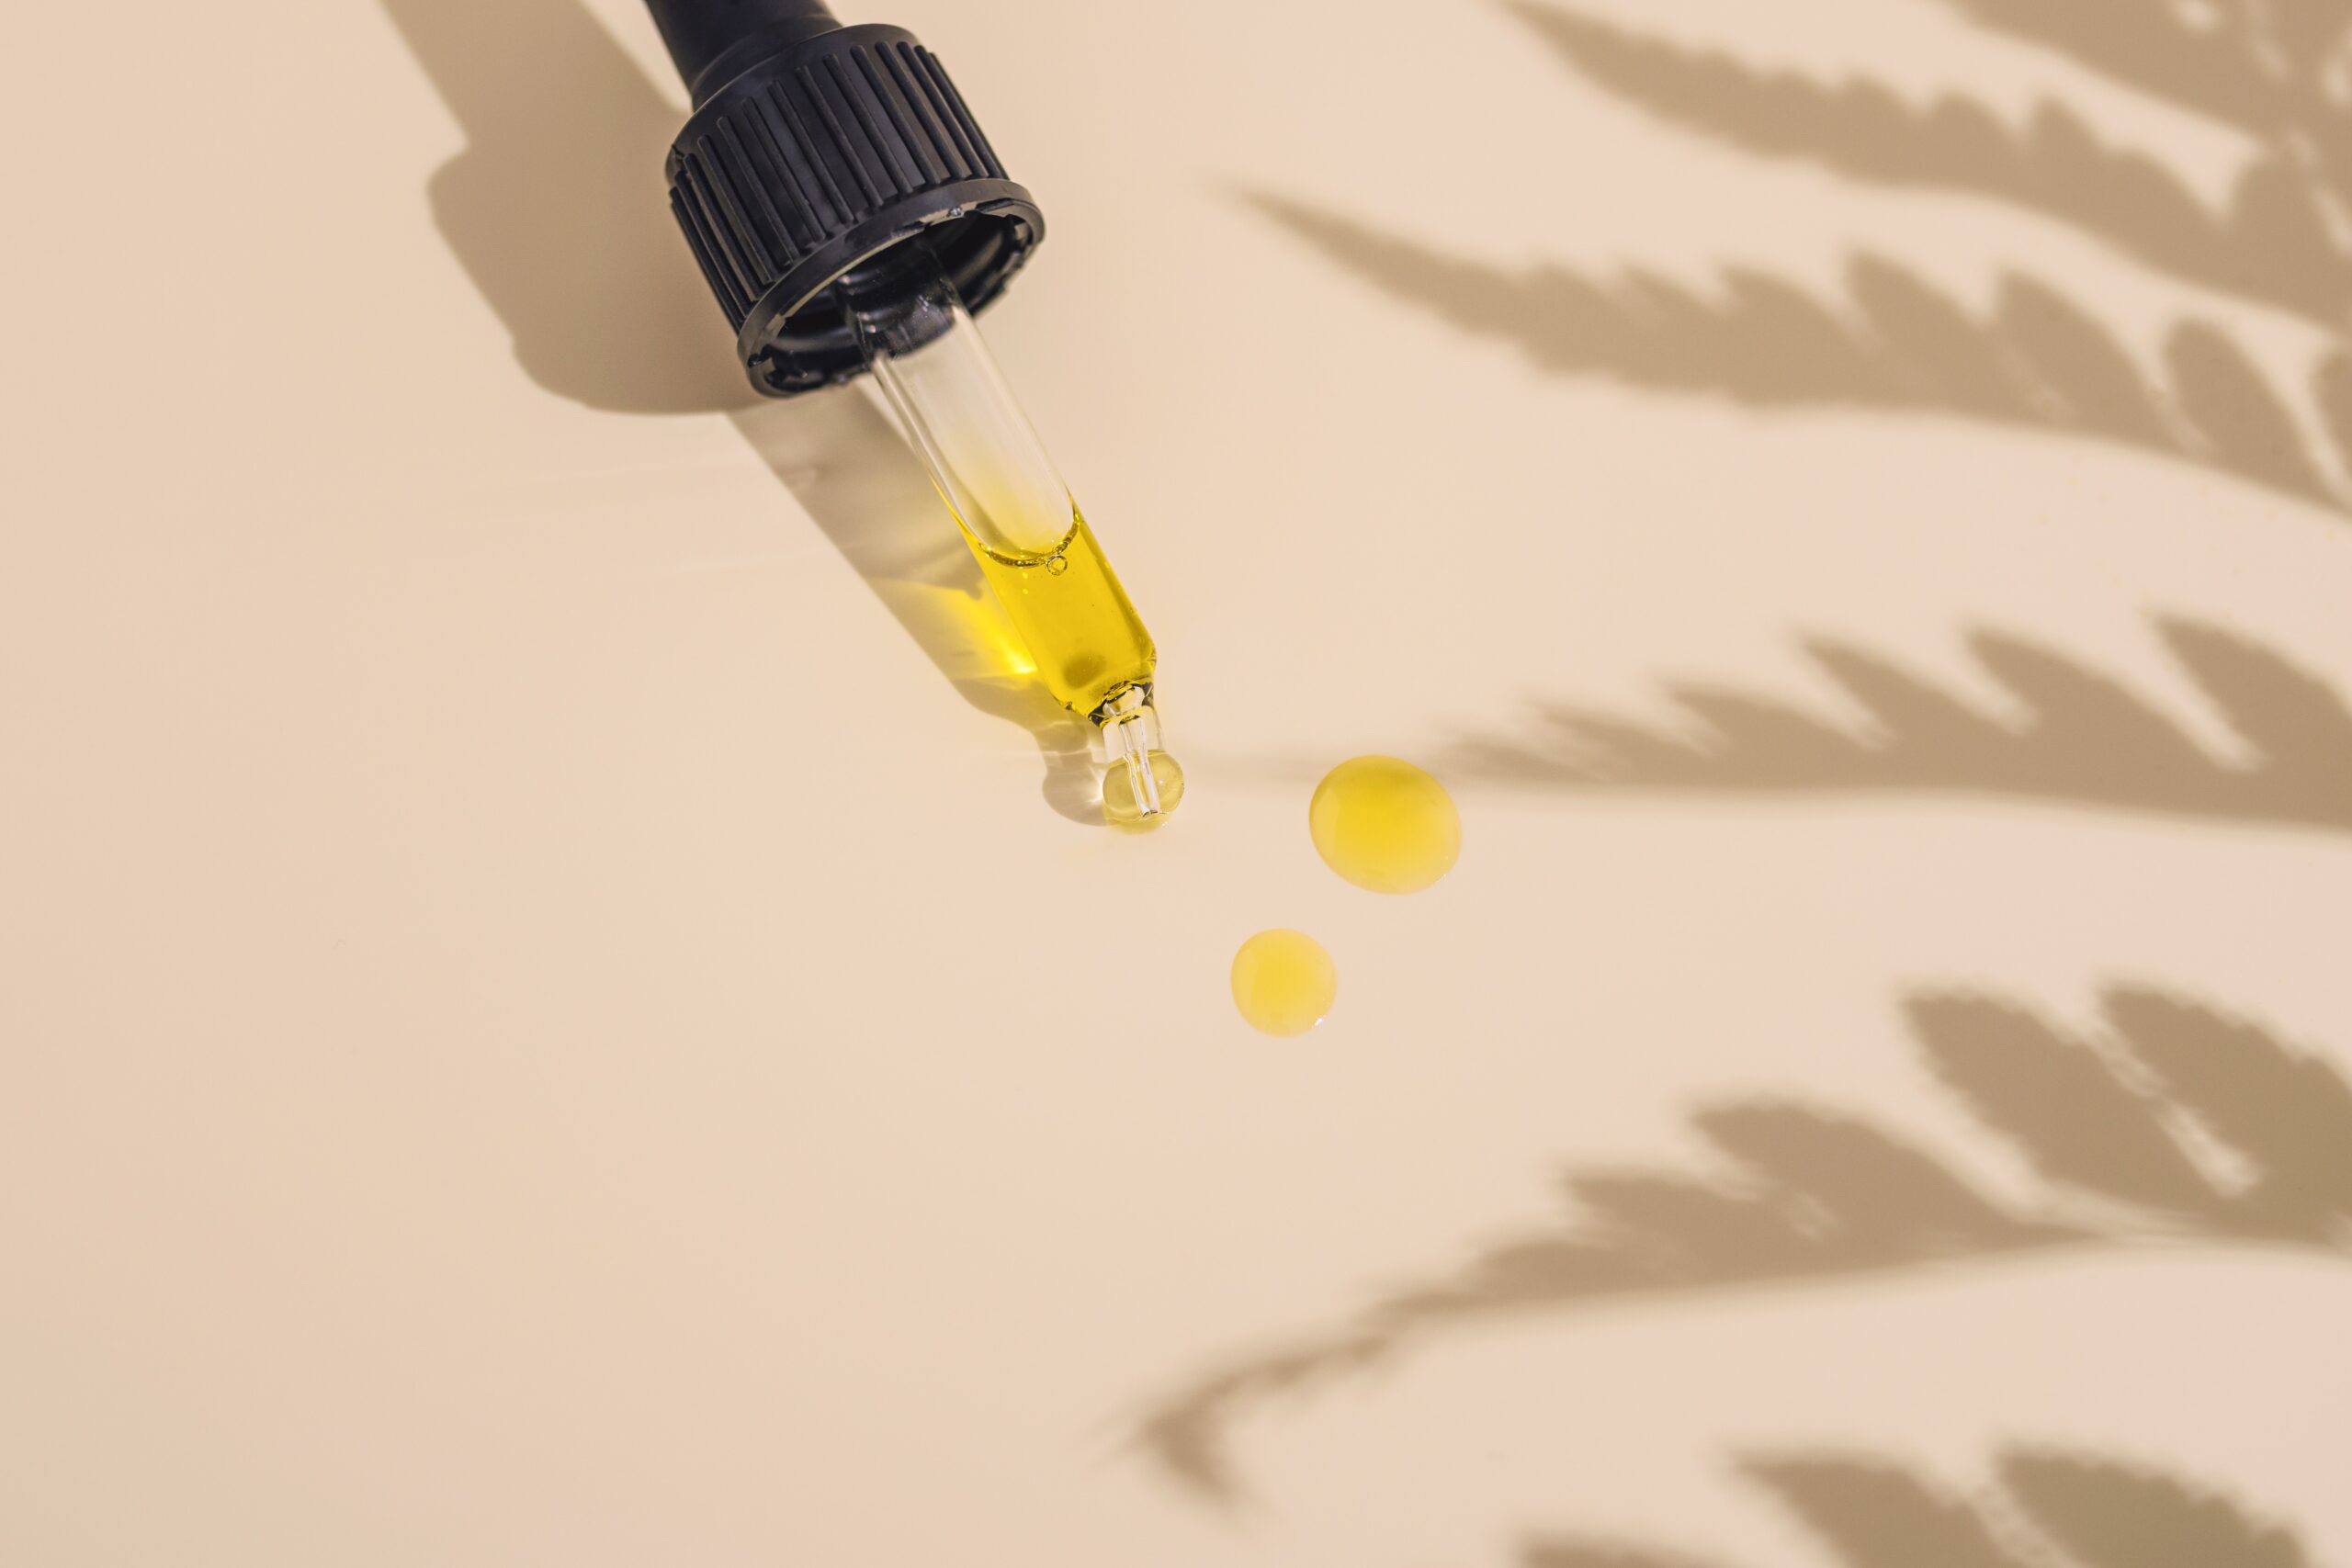 It is vital to check that the CBD product you are purchasing is genuine.